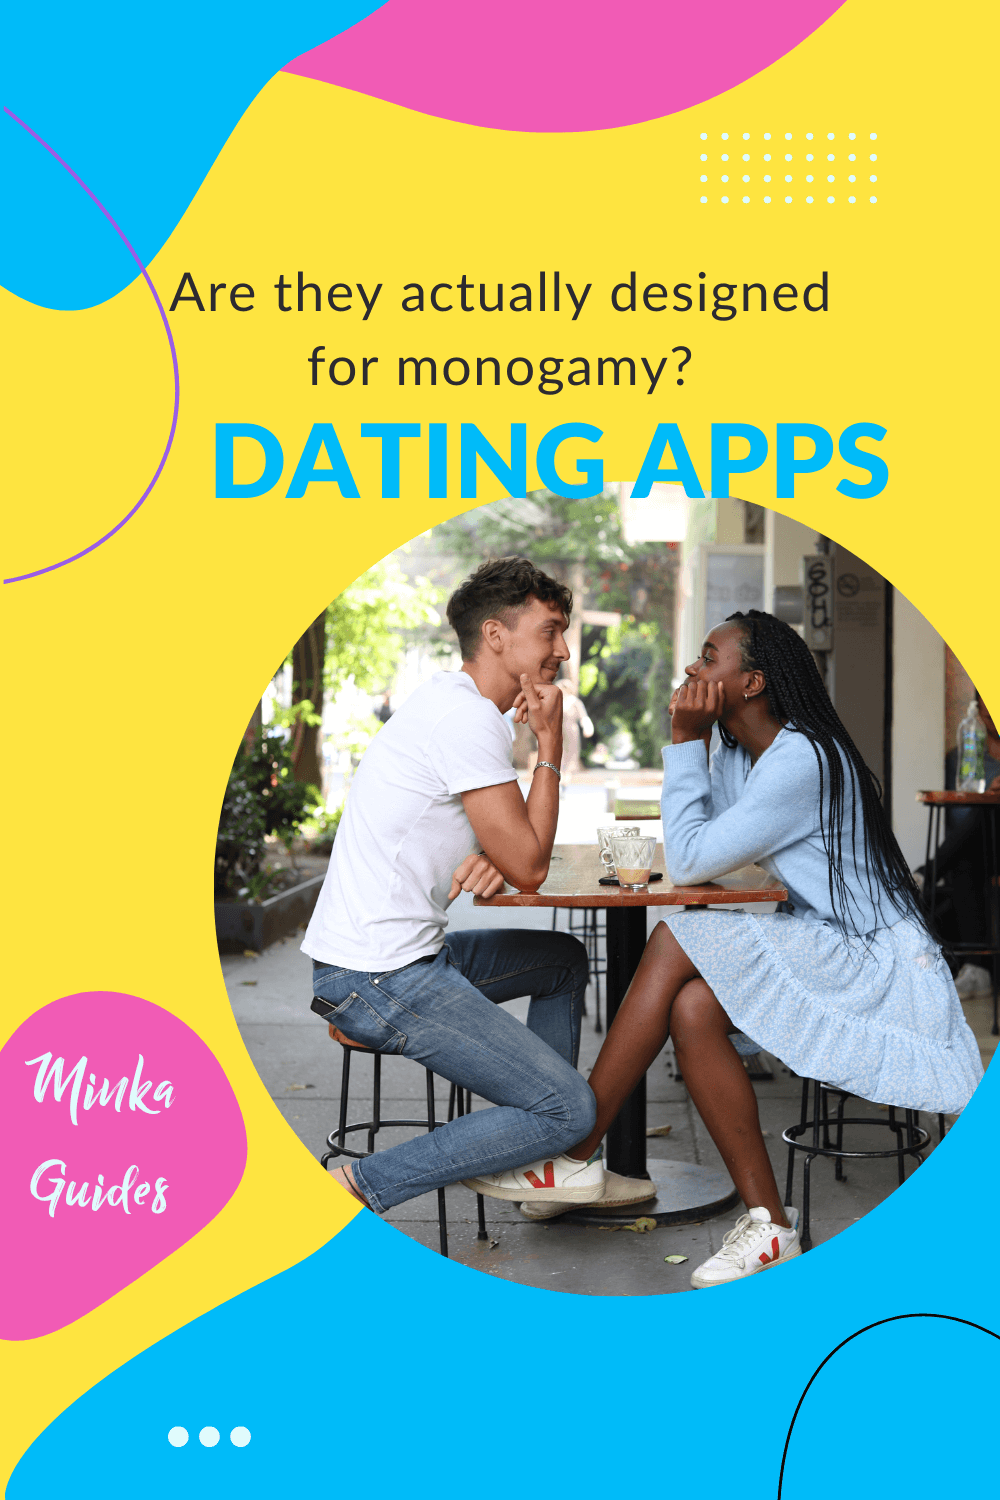 Dating apps don't work for monogamy | Minka Guides